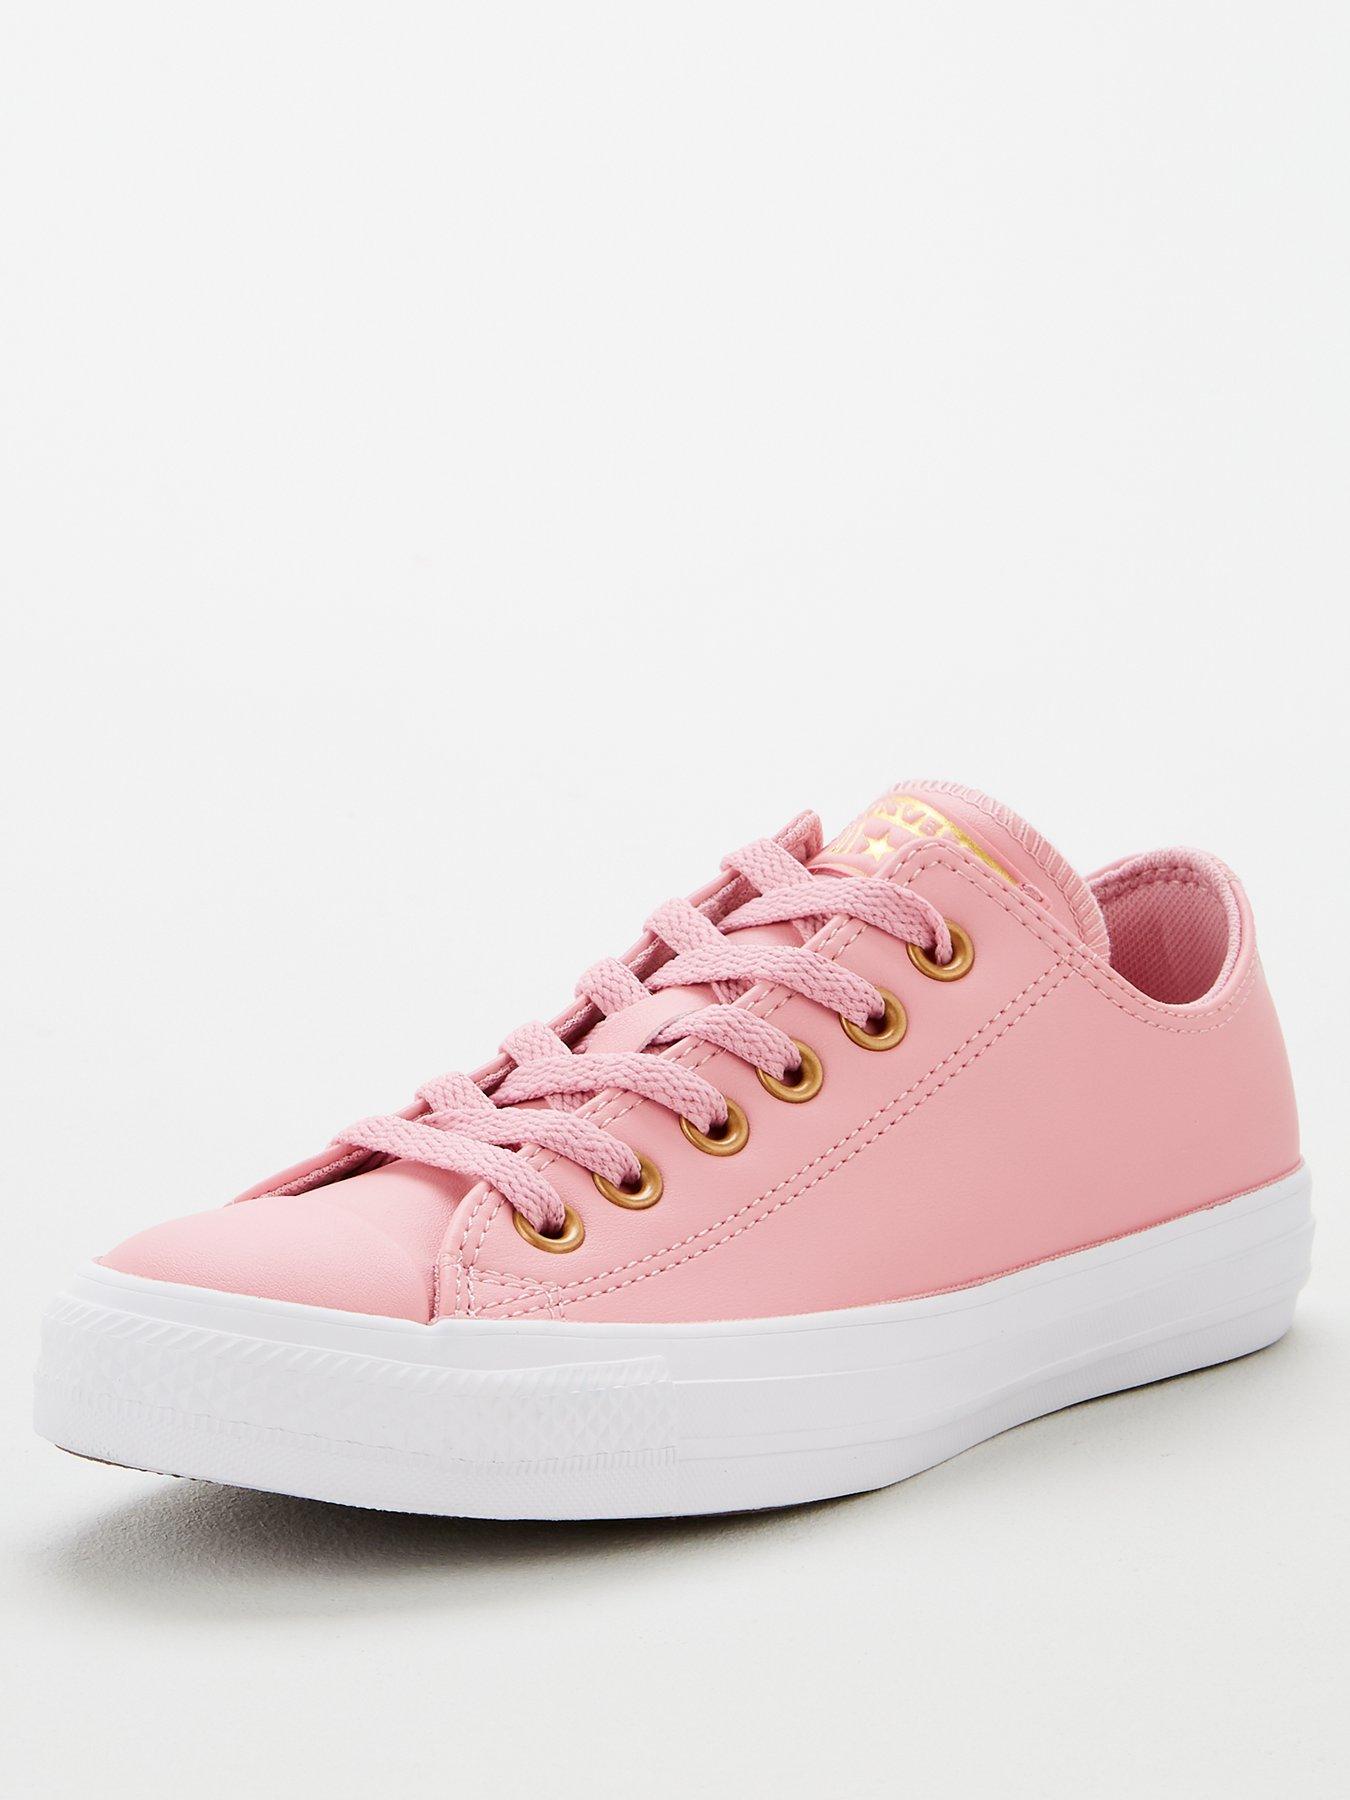 Converse Chuck Taylor All Star Faux Leather Ox Plimsoll - Pink | very.co.uk